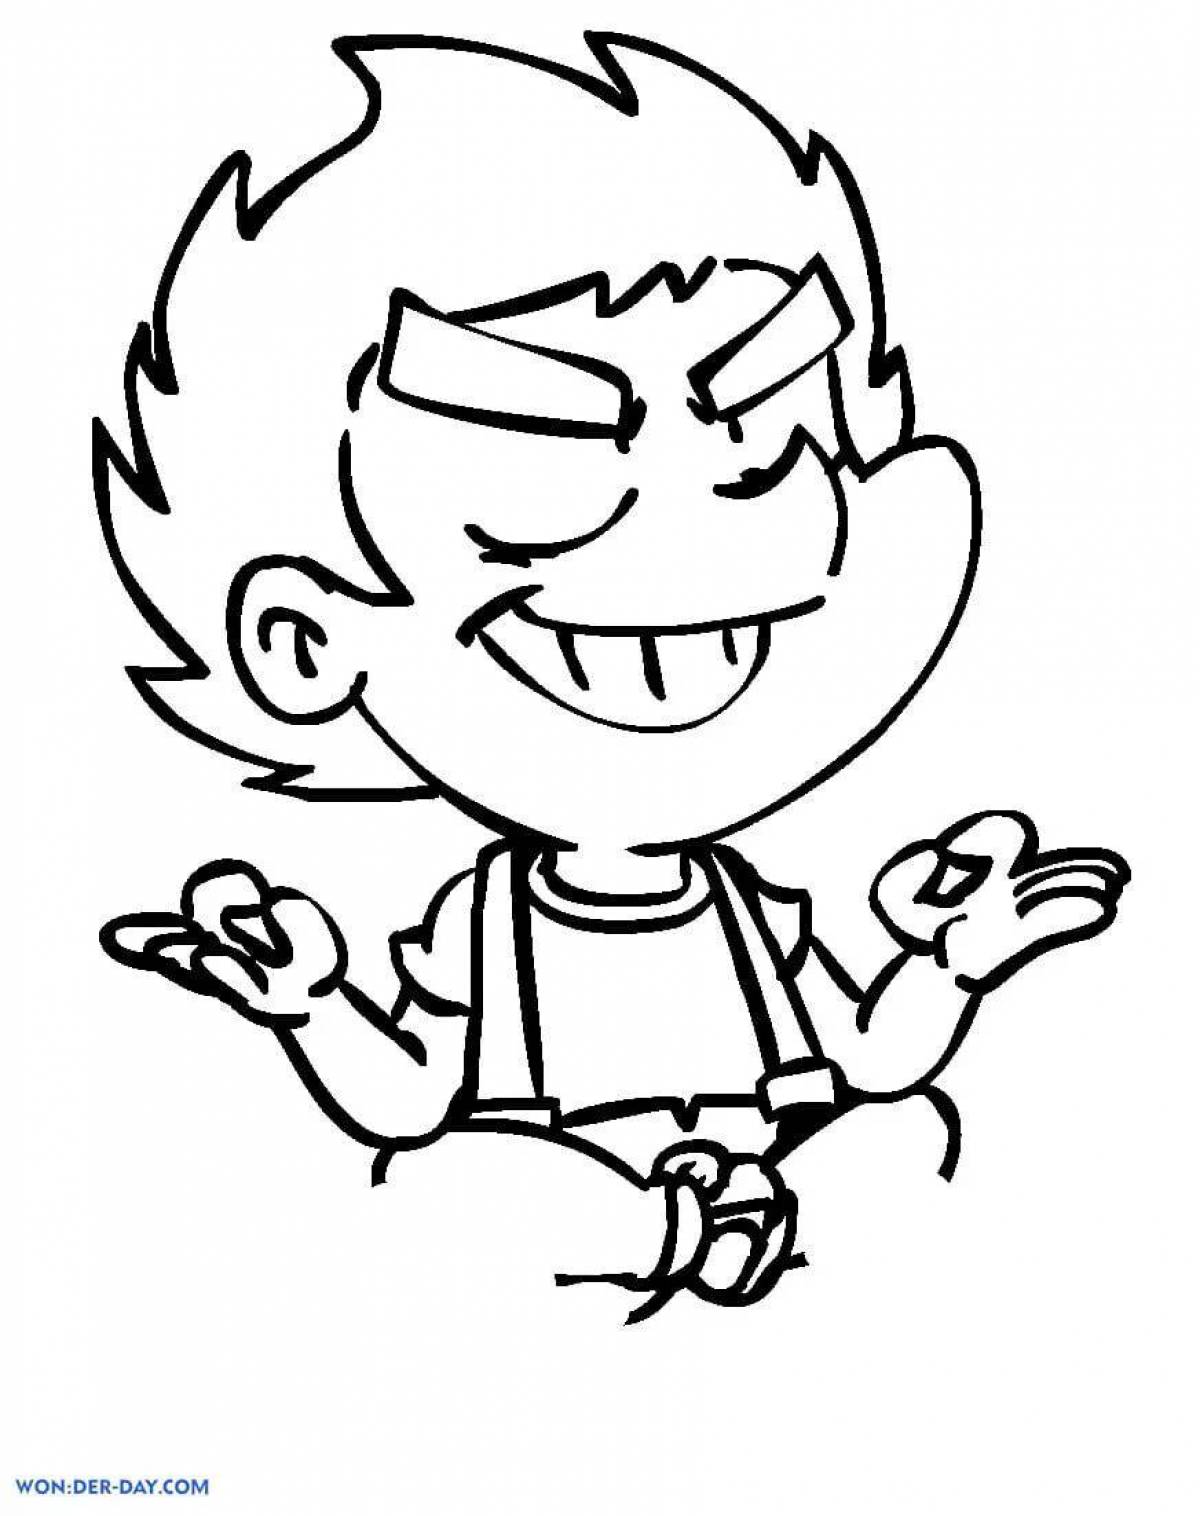 Ecstatic felix 13 cards coloring page